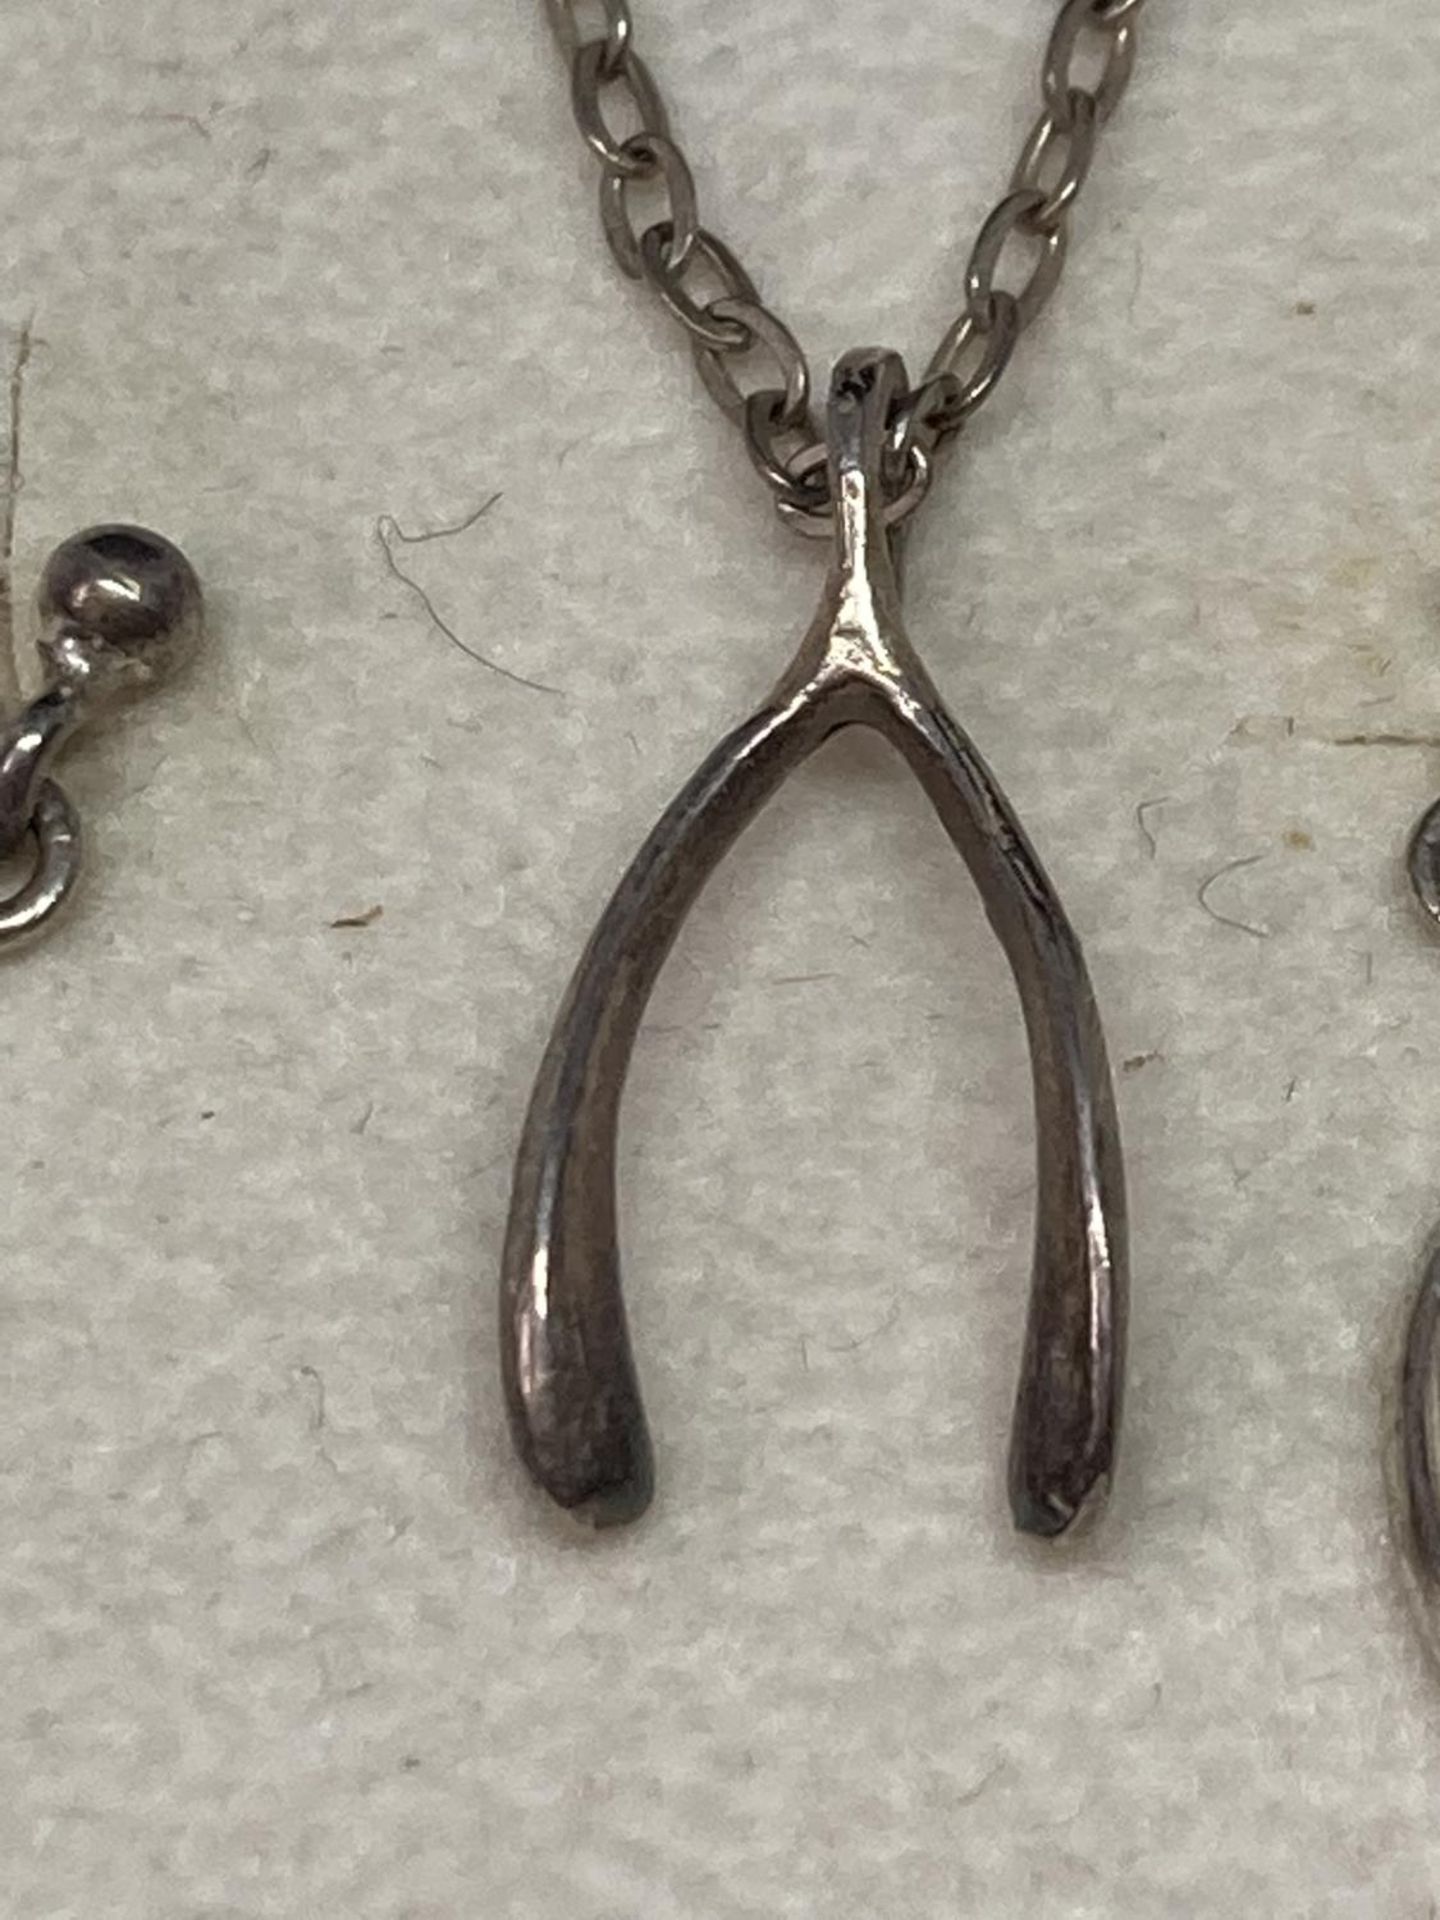 A SILVER WISHBONE NECKLACE AND EARRINGS - Image 3 of 3